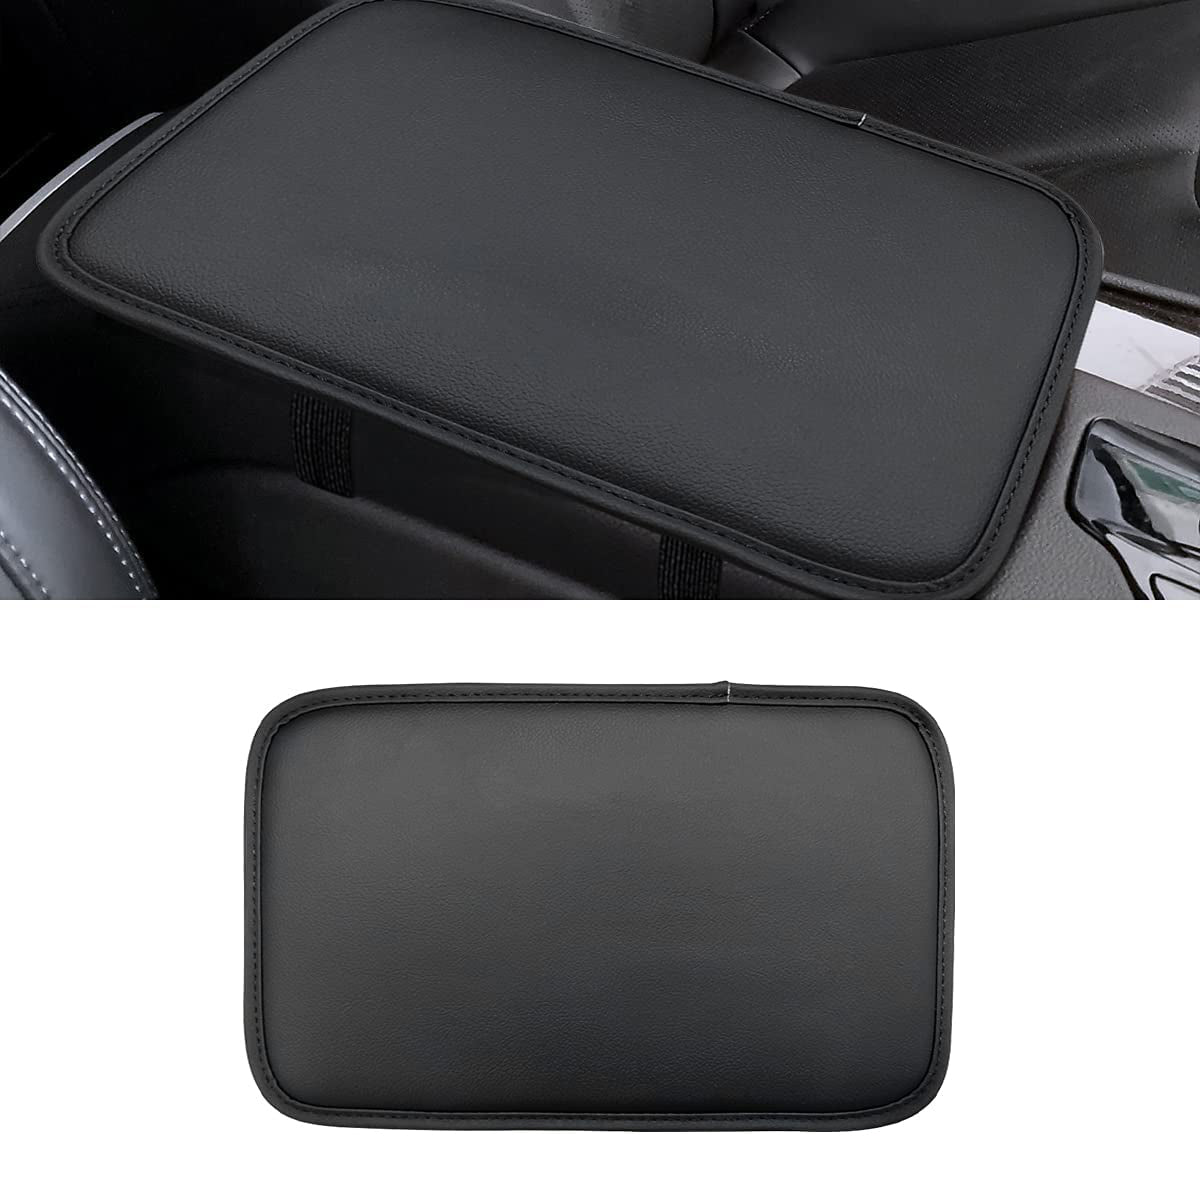 Leather Center Console Cushion Pad, Custom Fit For Your Cars, Waterproof Armrest Seat Box Cover Fit, Car Interior Protection Accessories, Car Accessories AR13991